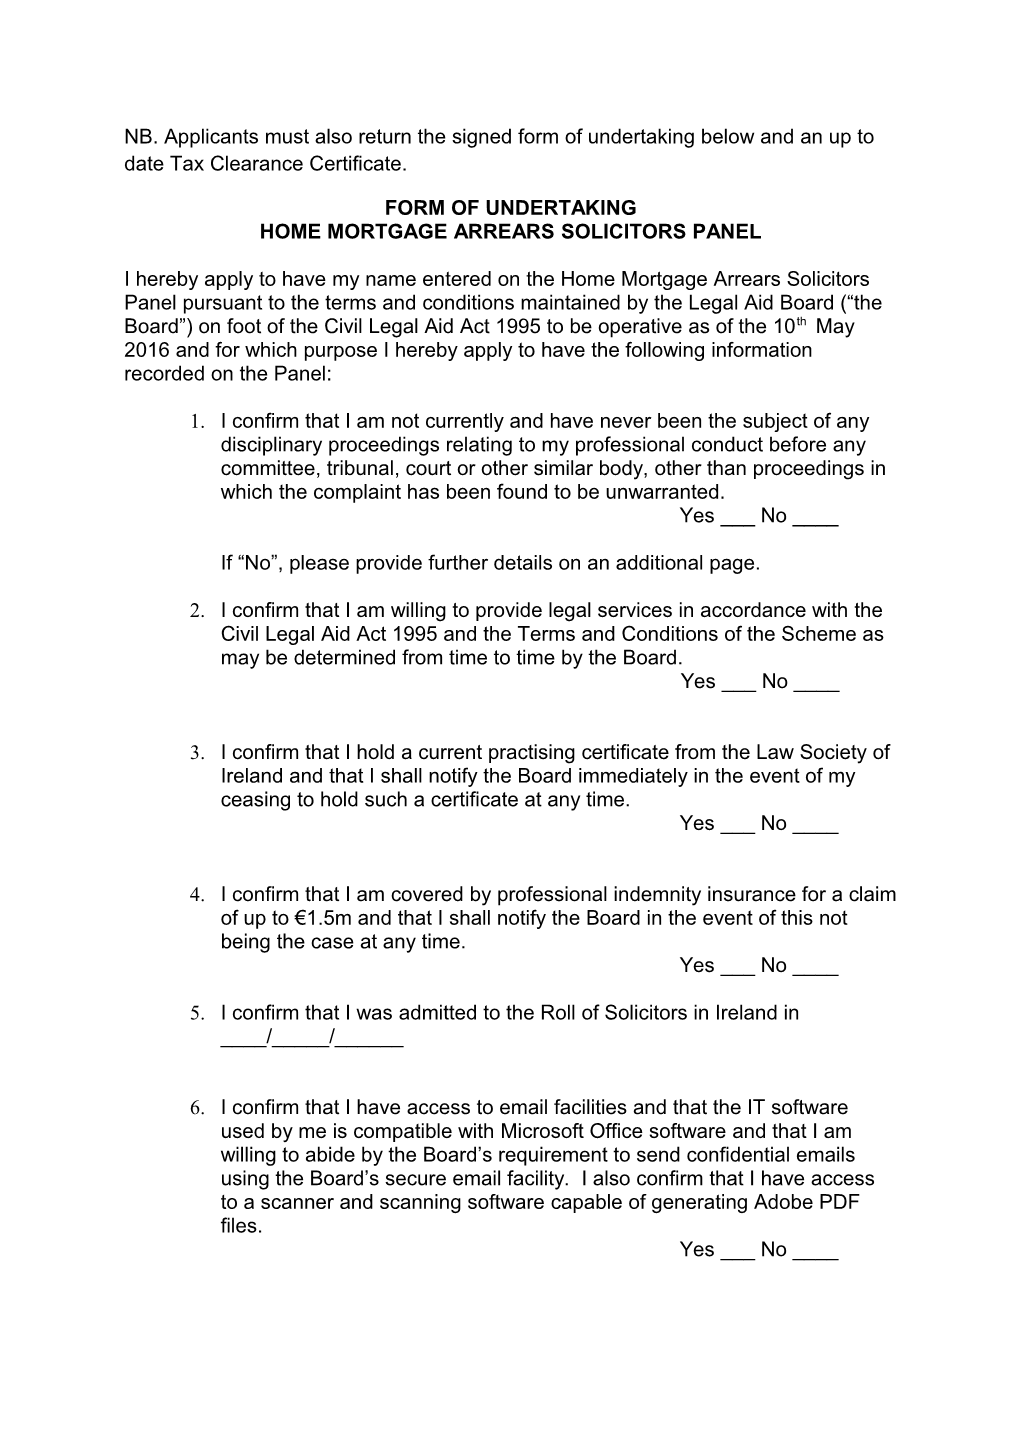 Application for Entry Onto Panel s1